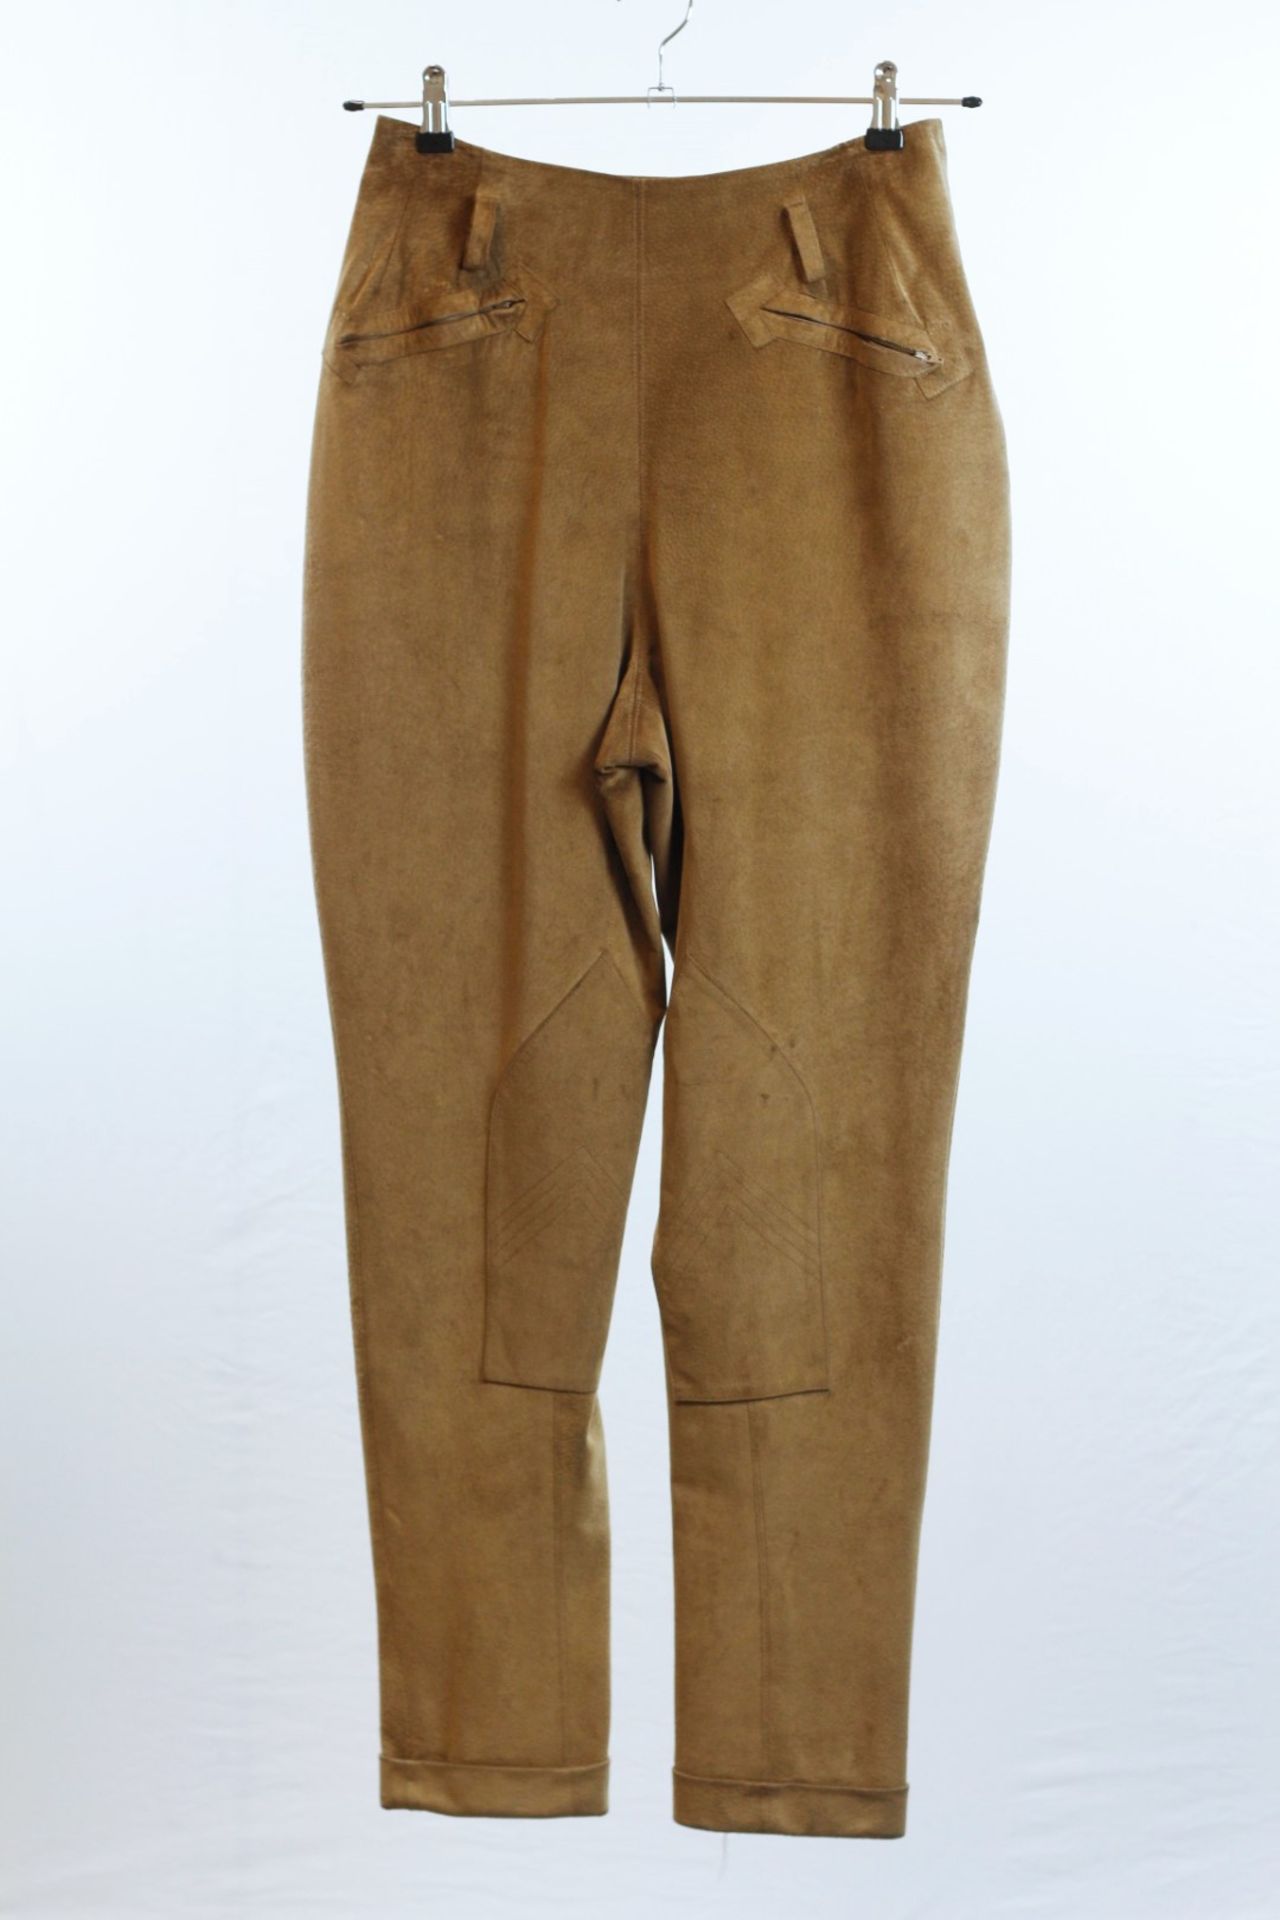 1 x Boutique Le Duc Fawn Brown Trousers - Size: 12 - Material: Natural Suede - From a High End - Image 5 of 13